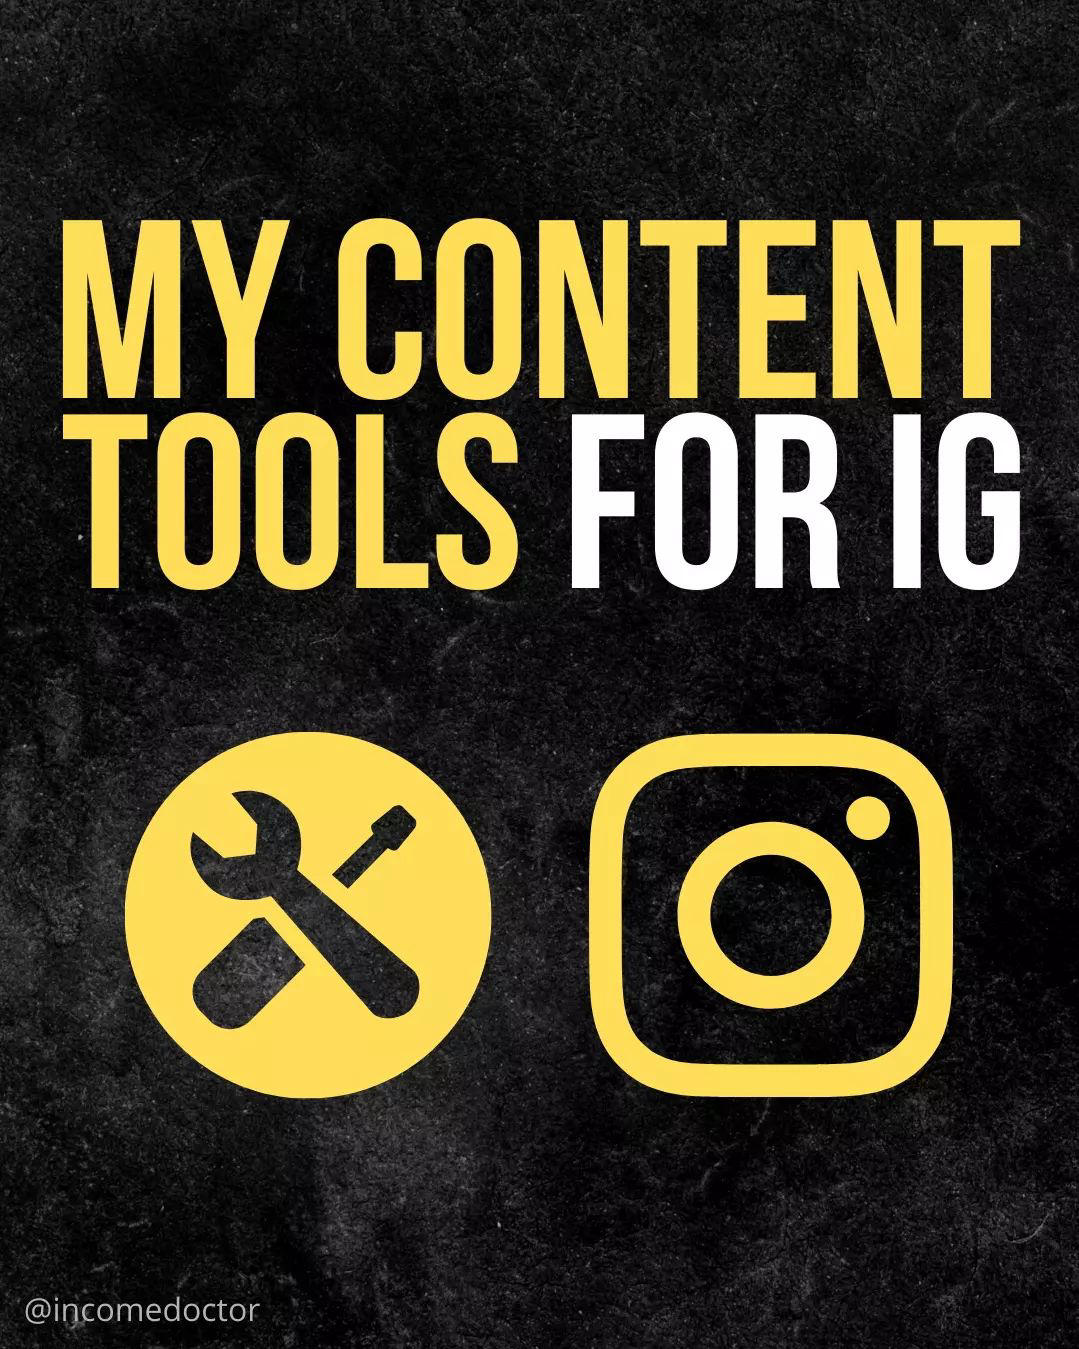 Vladimir ~ Brand & Design - Here is the list of my tools for content